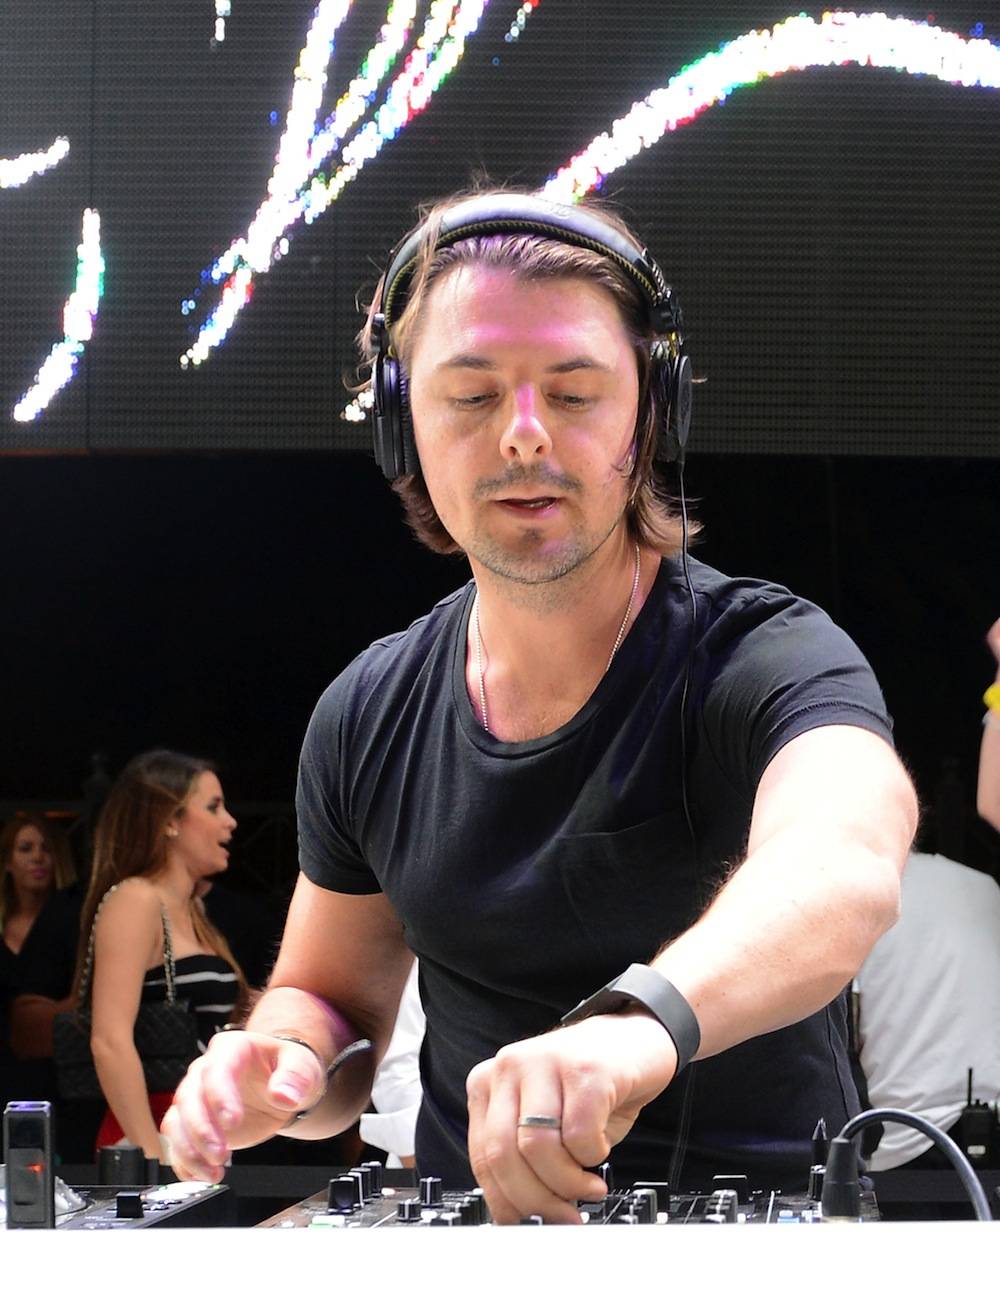 Eclipse At Daylight Beach Club Hosts Preview Featuring DJ Axwell